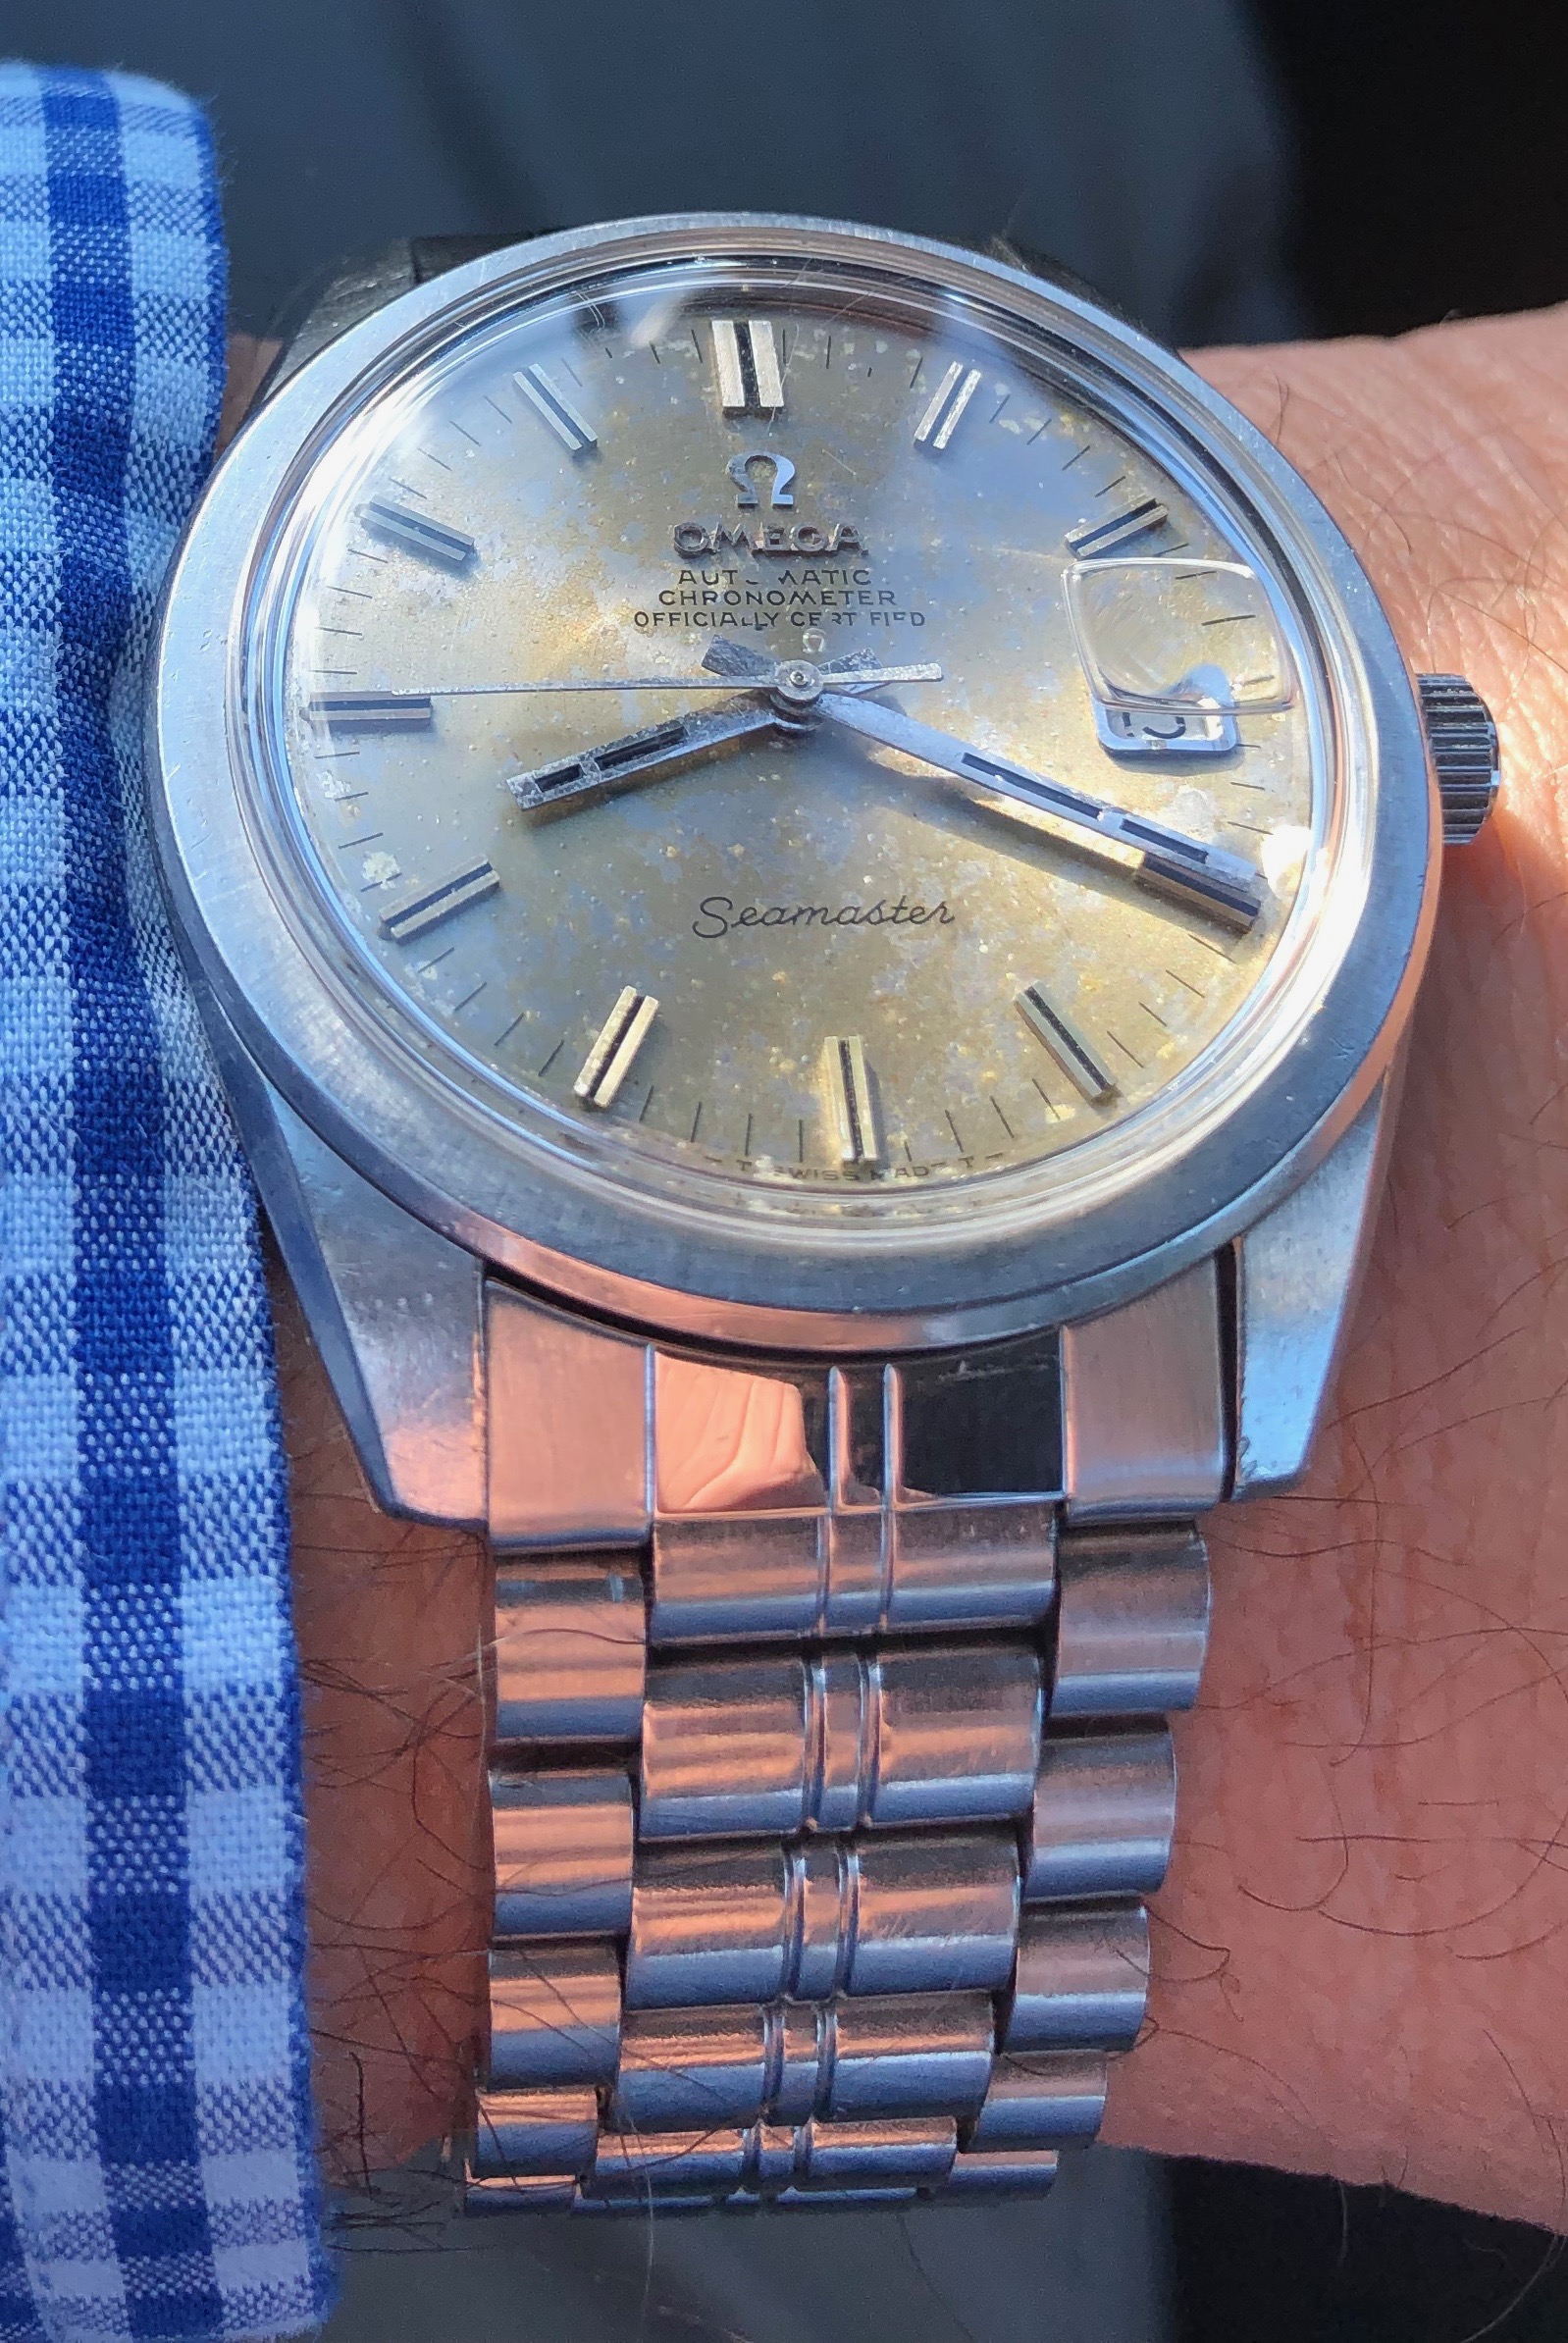 Seamaster cal. 564, help needed! | Omega Forums